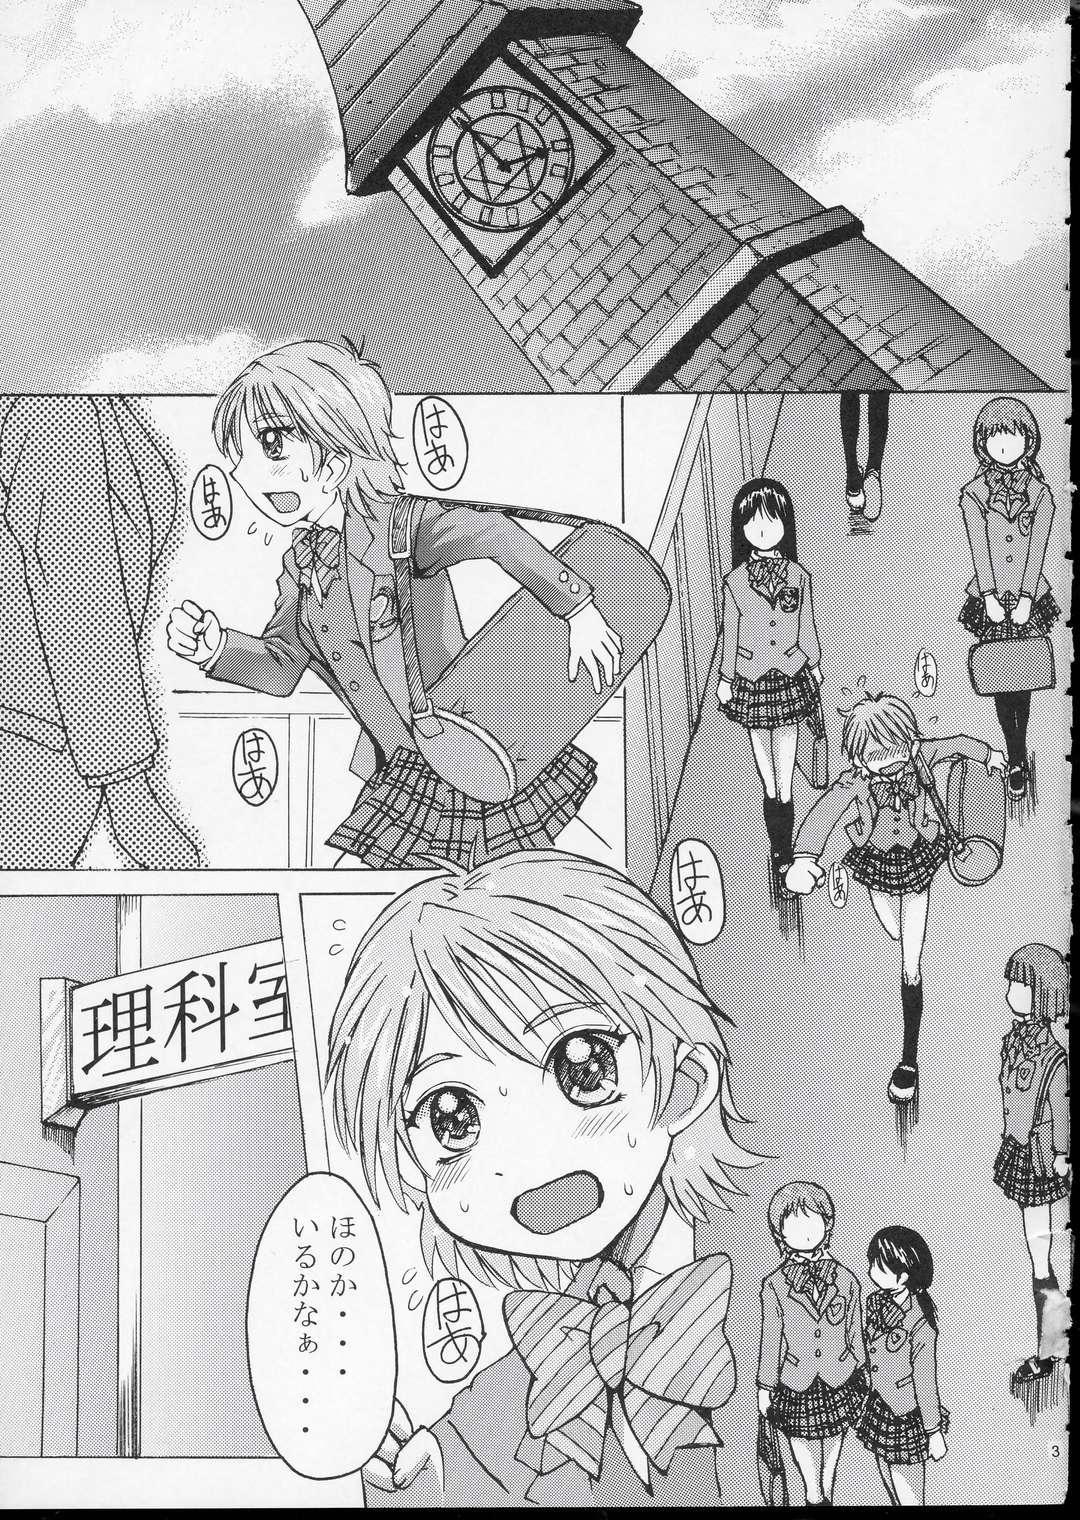 Toilet Kuroi Taiyou Kage no Tsuki EPISODE 1: In order that all may love you - Black Sun and Shadow Moon - Pretty cure Asiansex - Page 4